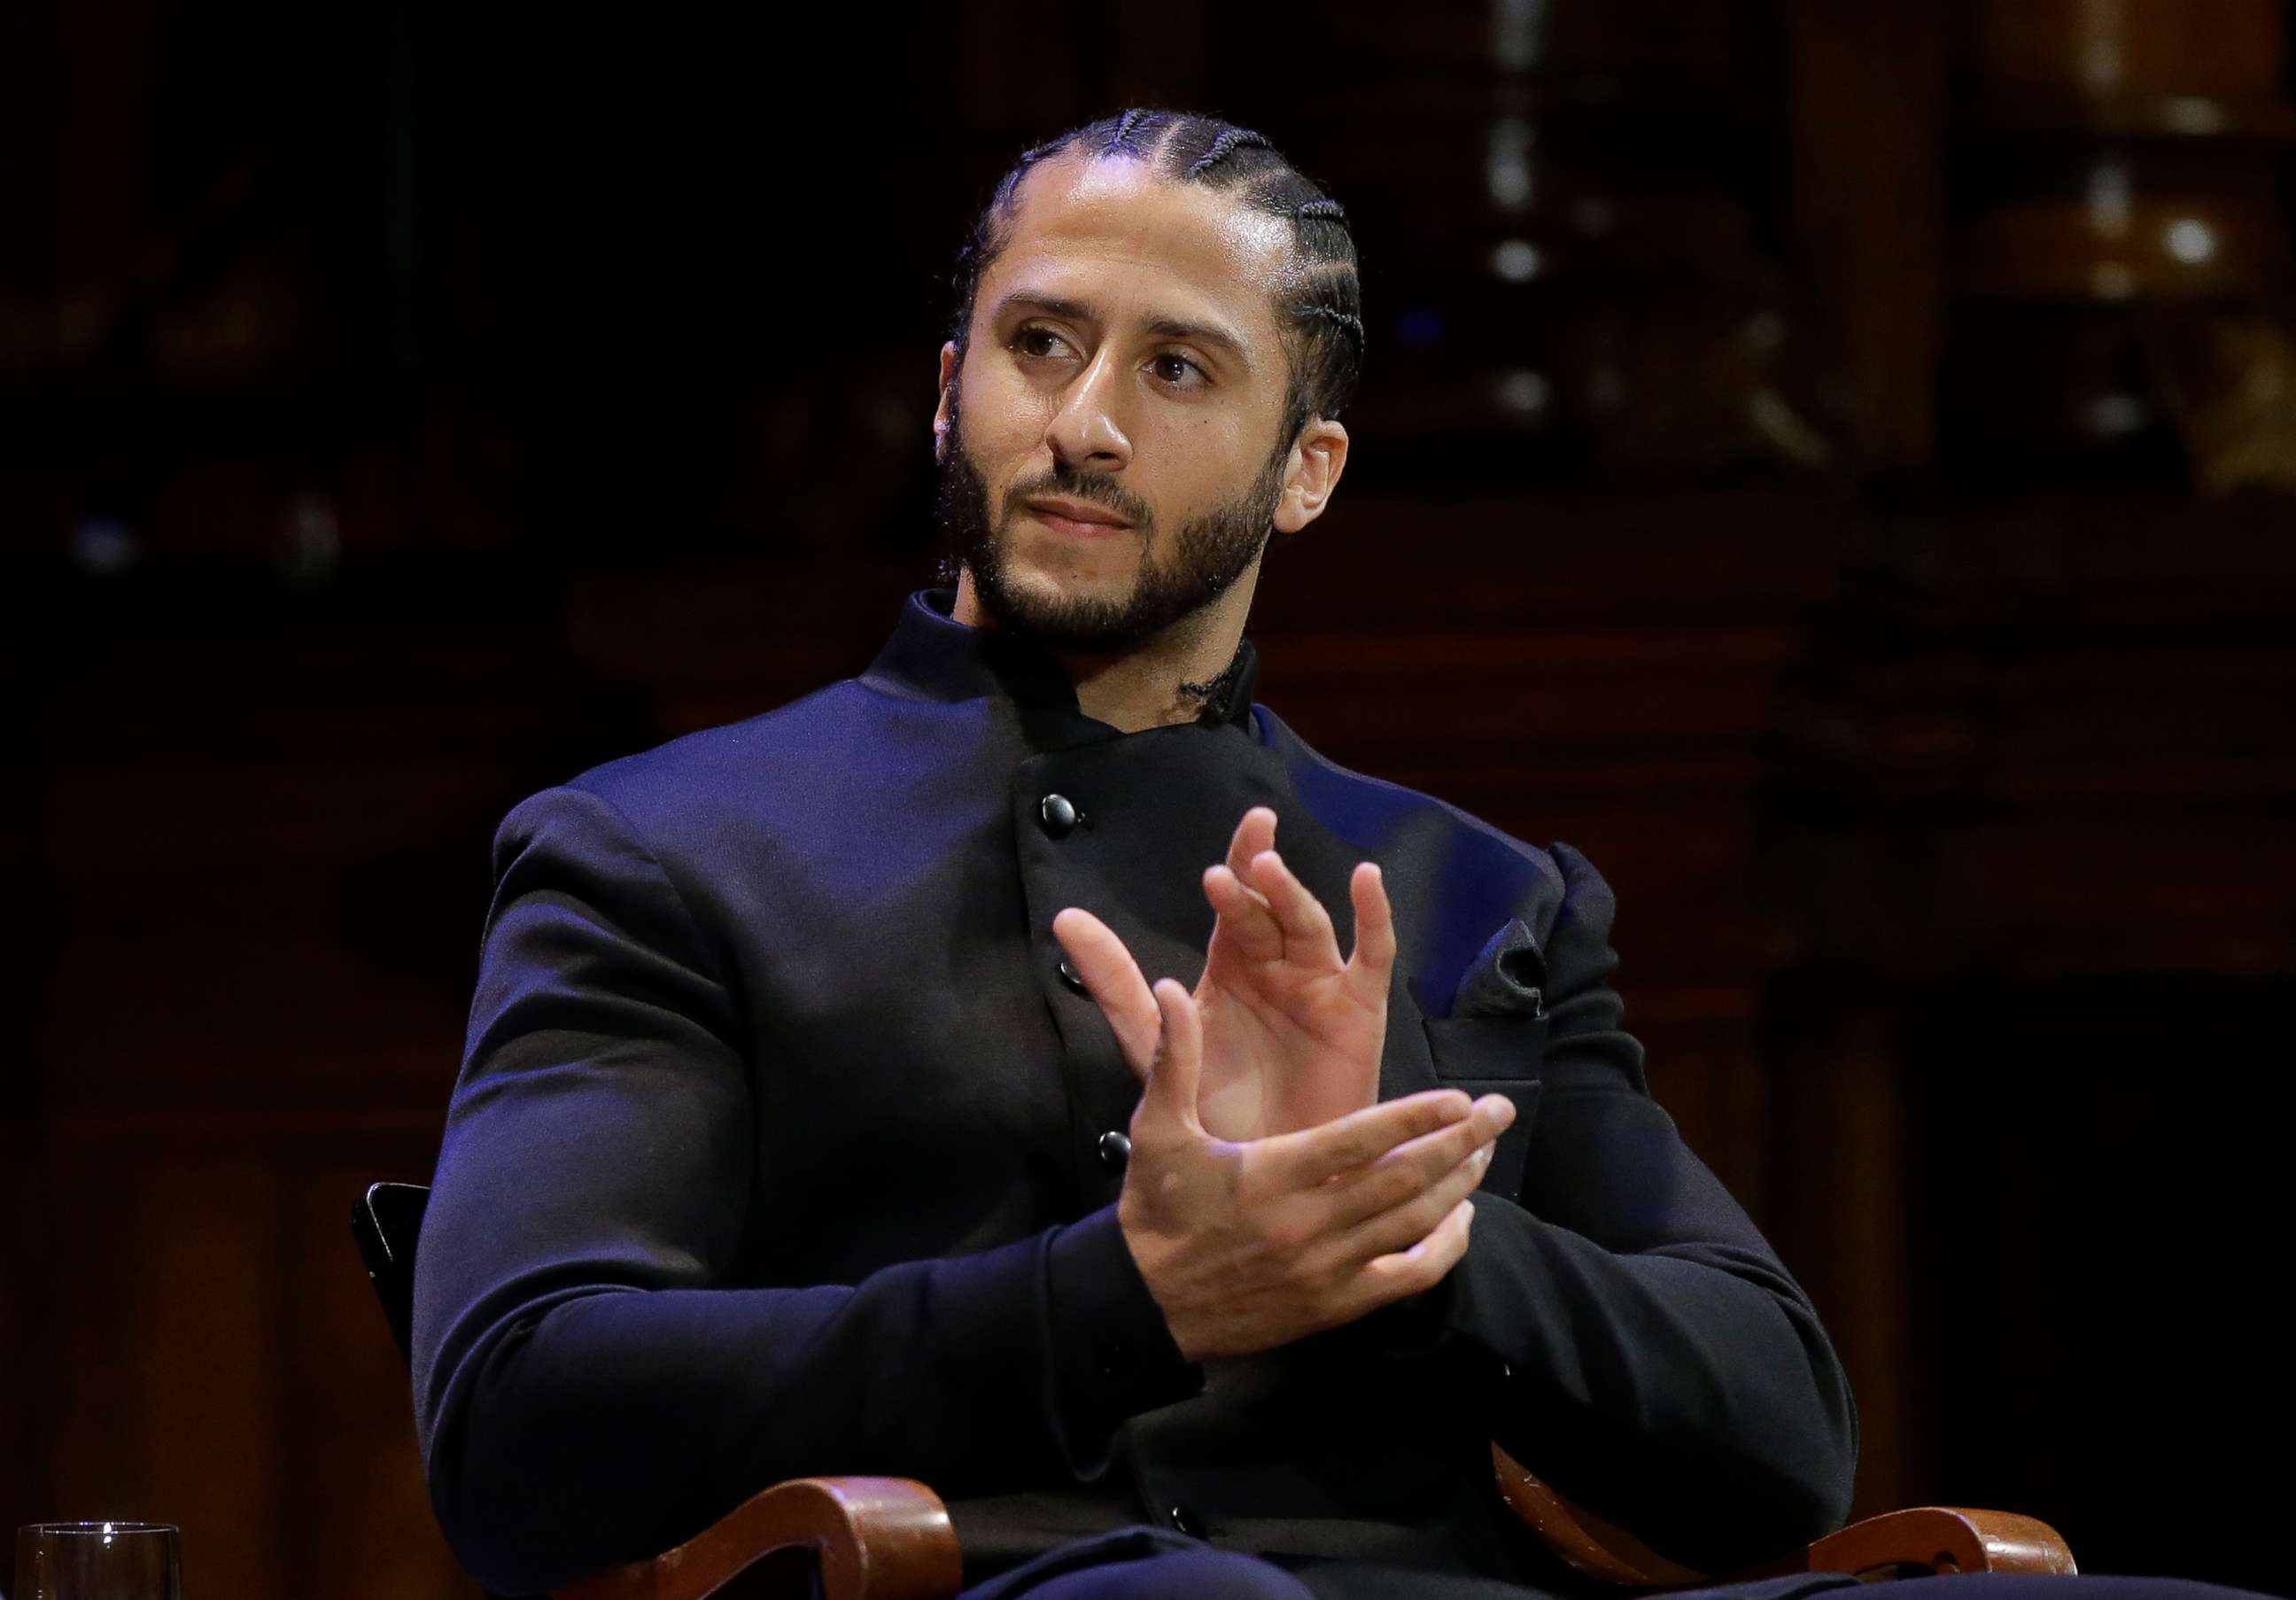 PHOTO: Former NFL football quarterback Colin Kaepernick applauds while seated on stage during W.E.B. Du Bois Medal ceremonies, Oct. 11, 2018, at Harvard University, in Cambridge, Mass.